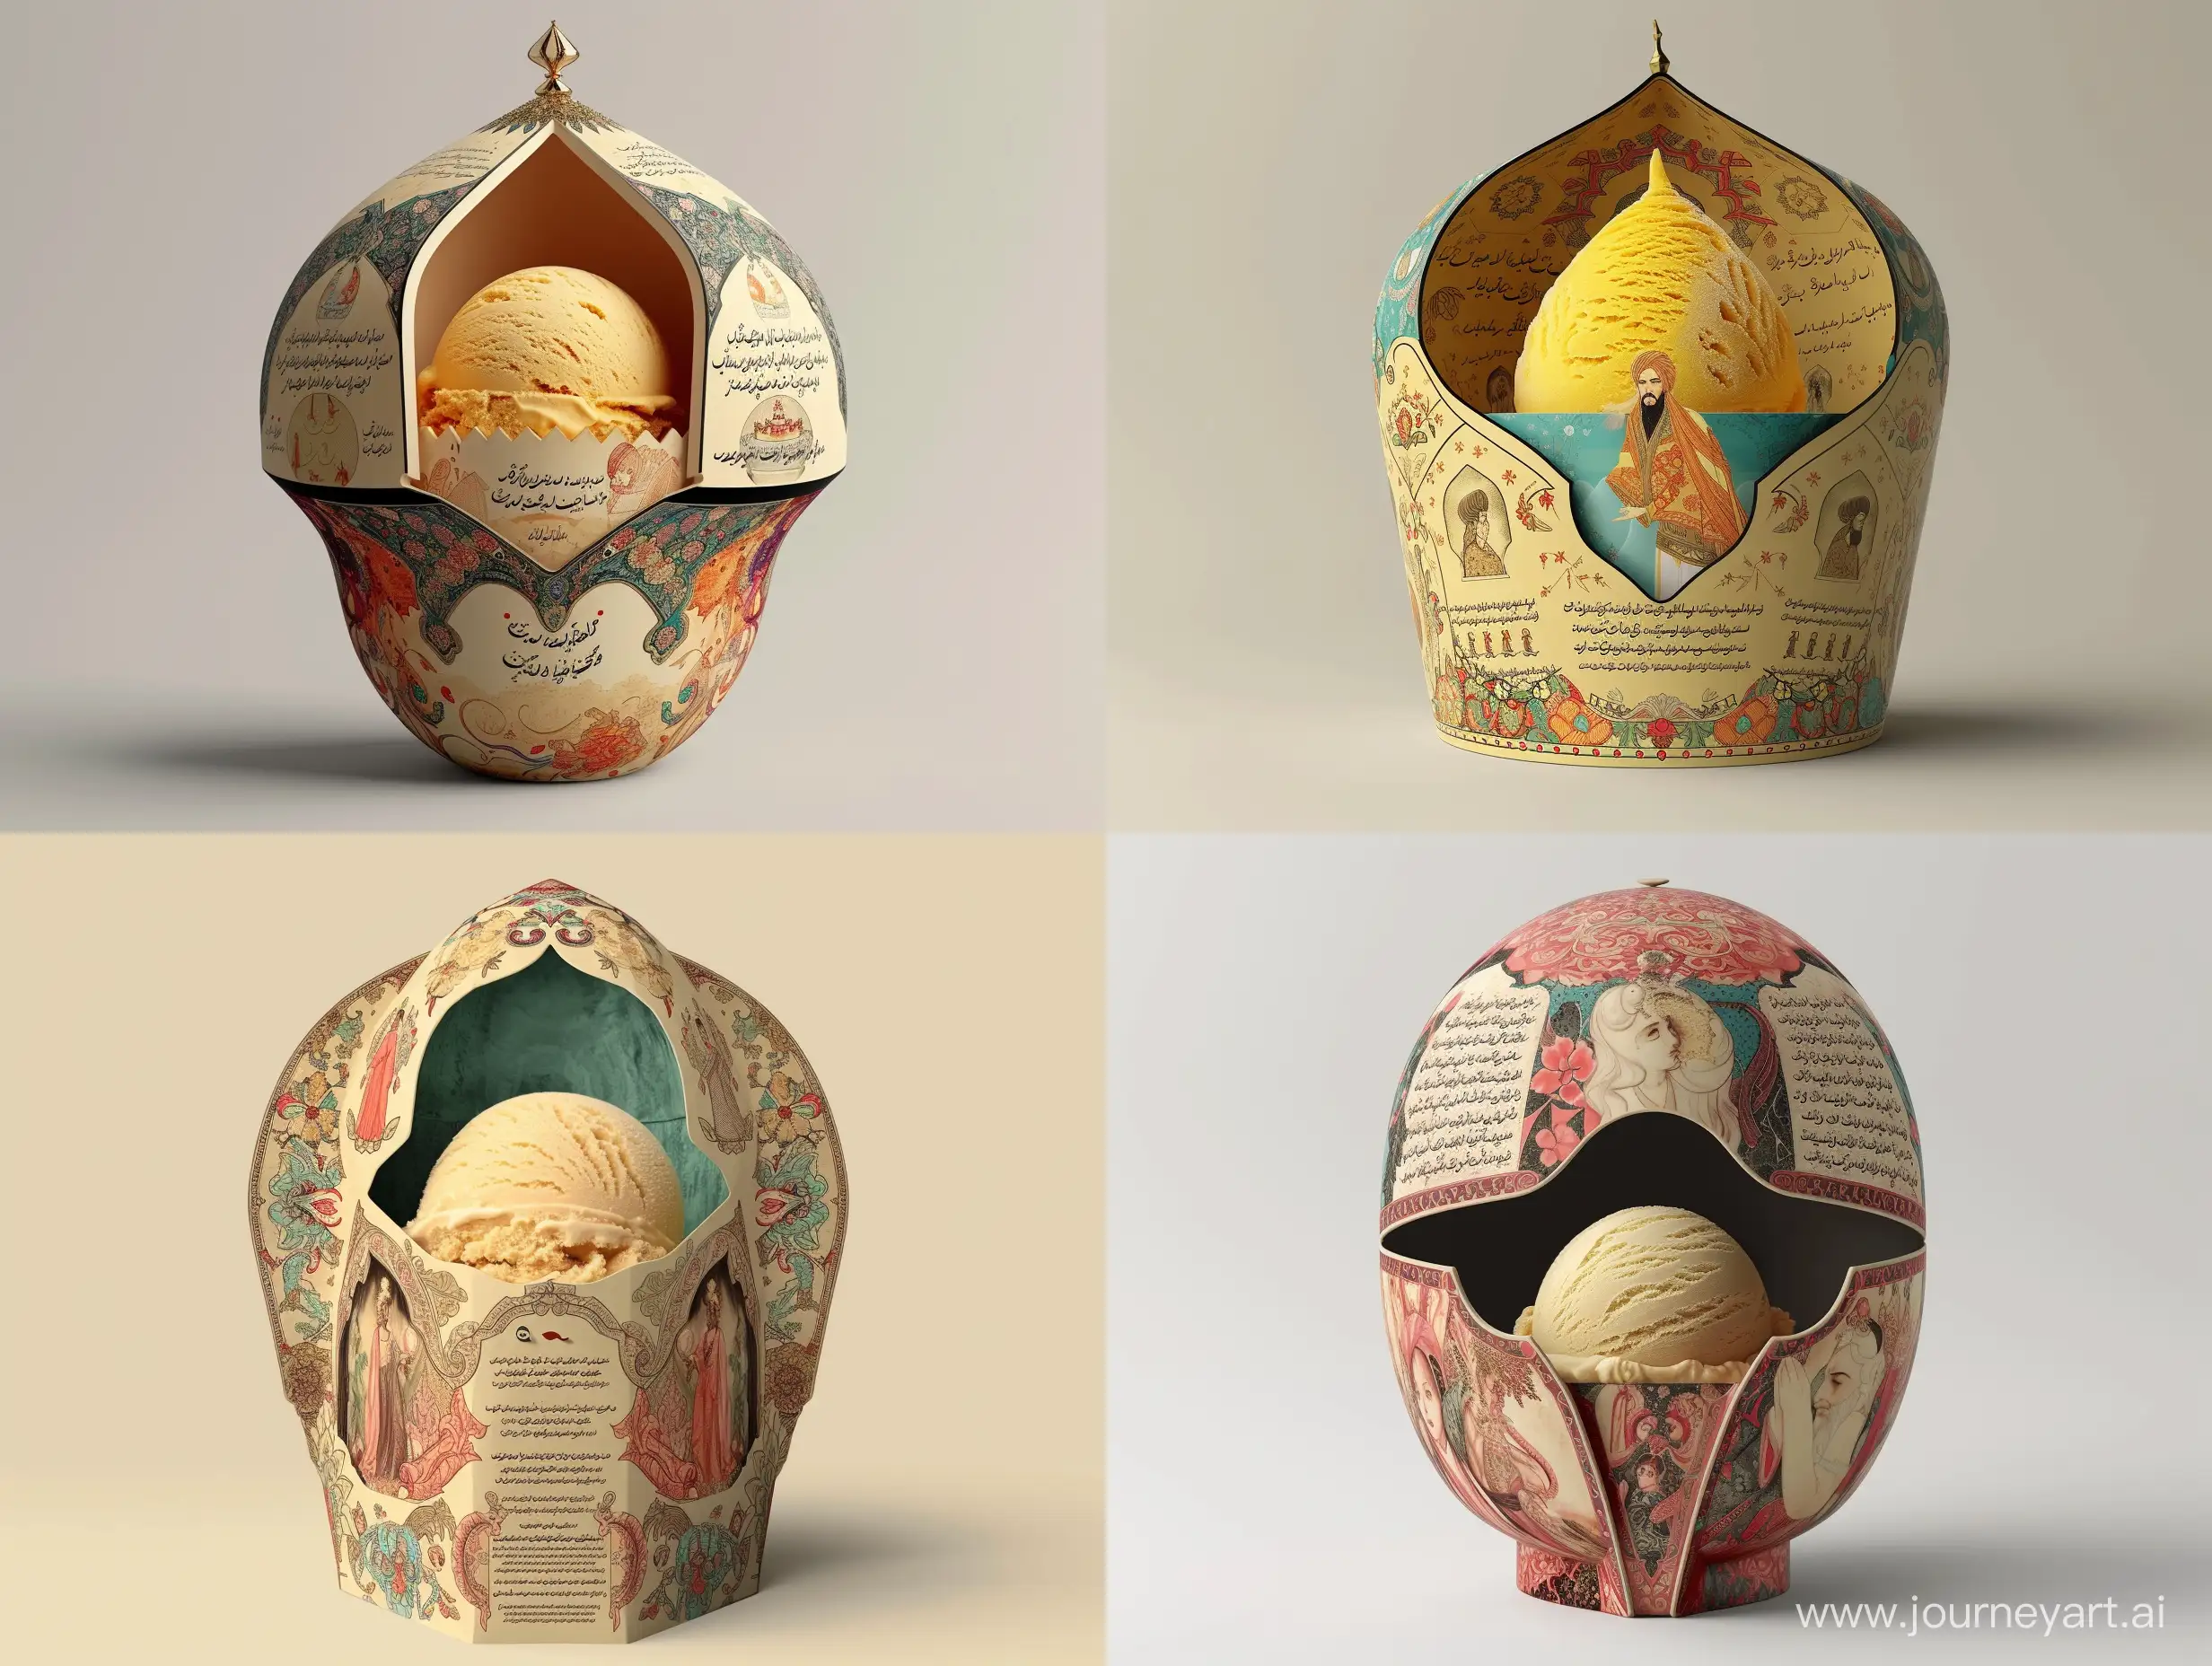 imagine an image of The packaging for traditional Persian ice cream is designed with a stunning and environmentally friendly minimal style, using sustainable materials. It takes the shape of a luxurious opulent Persian helmet, embellished with Persian fairytale storyboard reliefs inspired by the works of Hokusai and James Gurney+Ralph Steadman. The design features minimal yet intricate traditional motifs, creating a visually striking presentation. Inside, the luxurious saffron ice cream is held within layers adorned with poetic inscriptions, adding elegance and artistry to the experience. The entire presentation is aimed at being sustainable and eco-friendly, aligning with the current trend towards environmental consciousness. This packaging not only showcases the rich cultural heritage of Persian ice cream but also elevates it to a new level of luxury and artistry, embodying minimal sustainable opulence. It is perfect for those who appreciate both tradition and innovation in their culinary experiences.realistic style